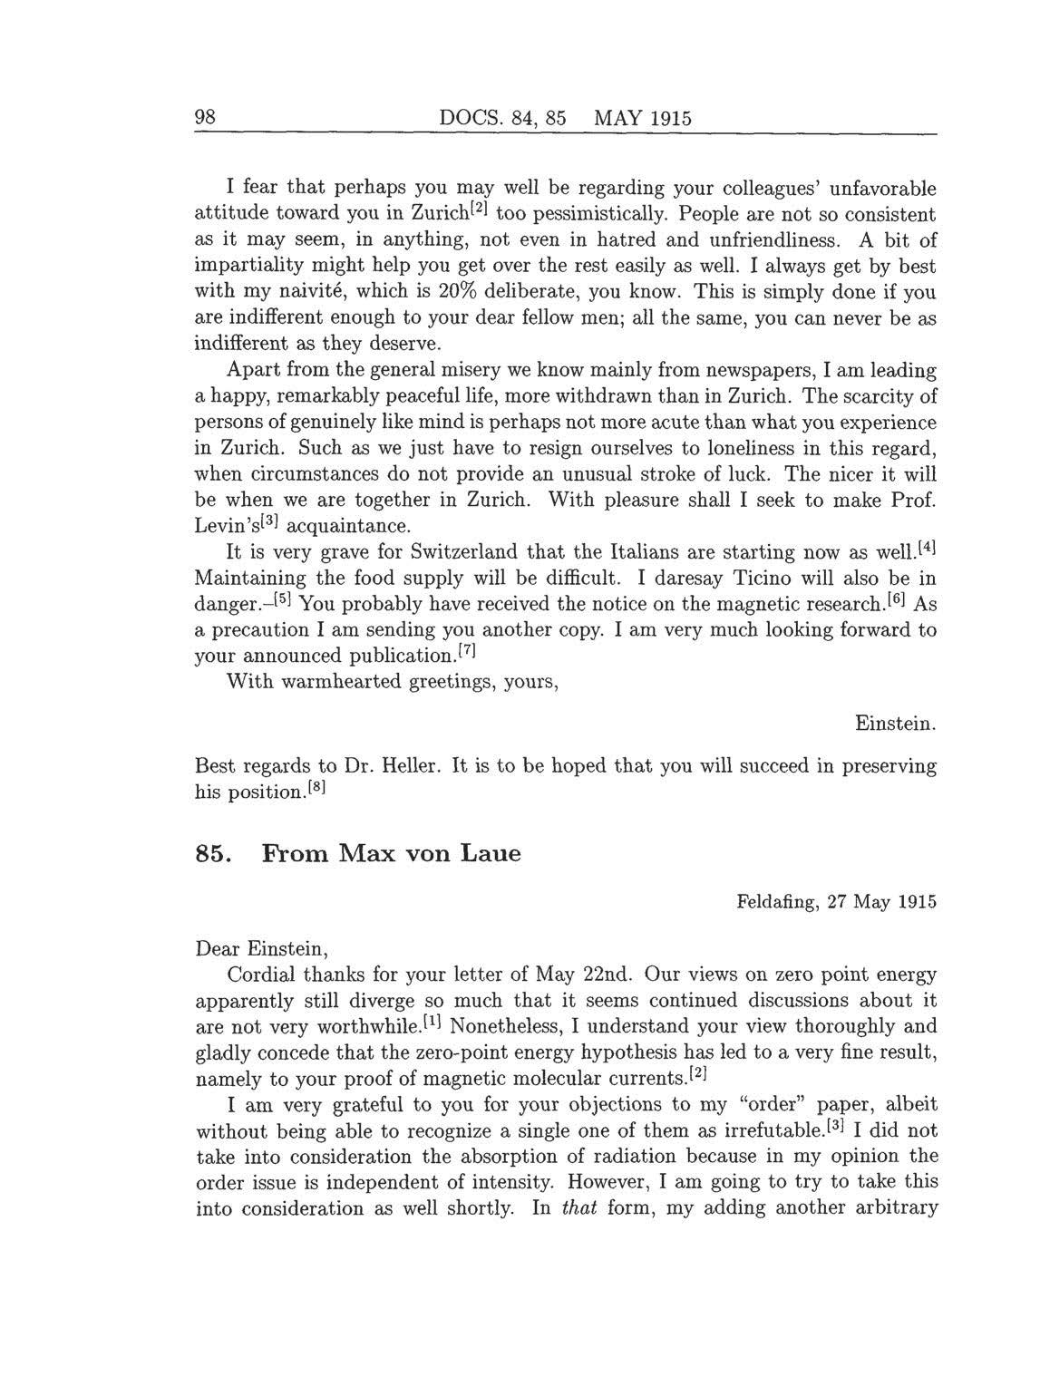 Volume 8: The Berlin Years: Correspondence, 1914-1918 (English translation supplement) page 98